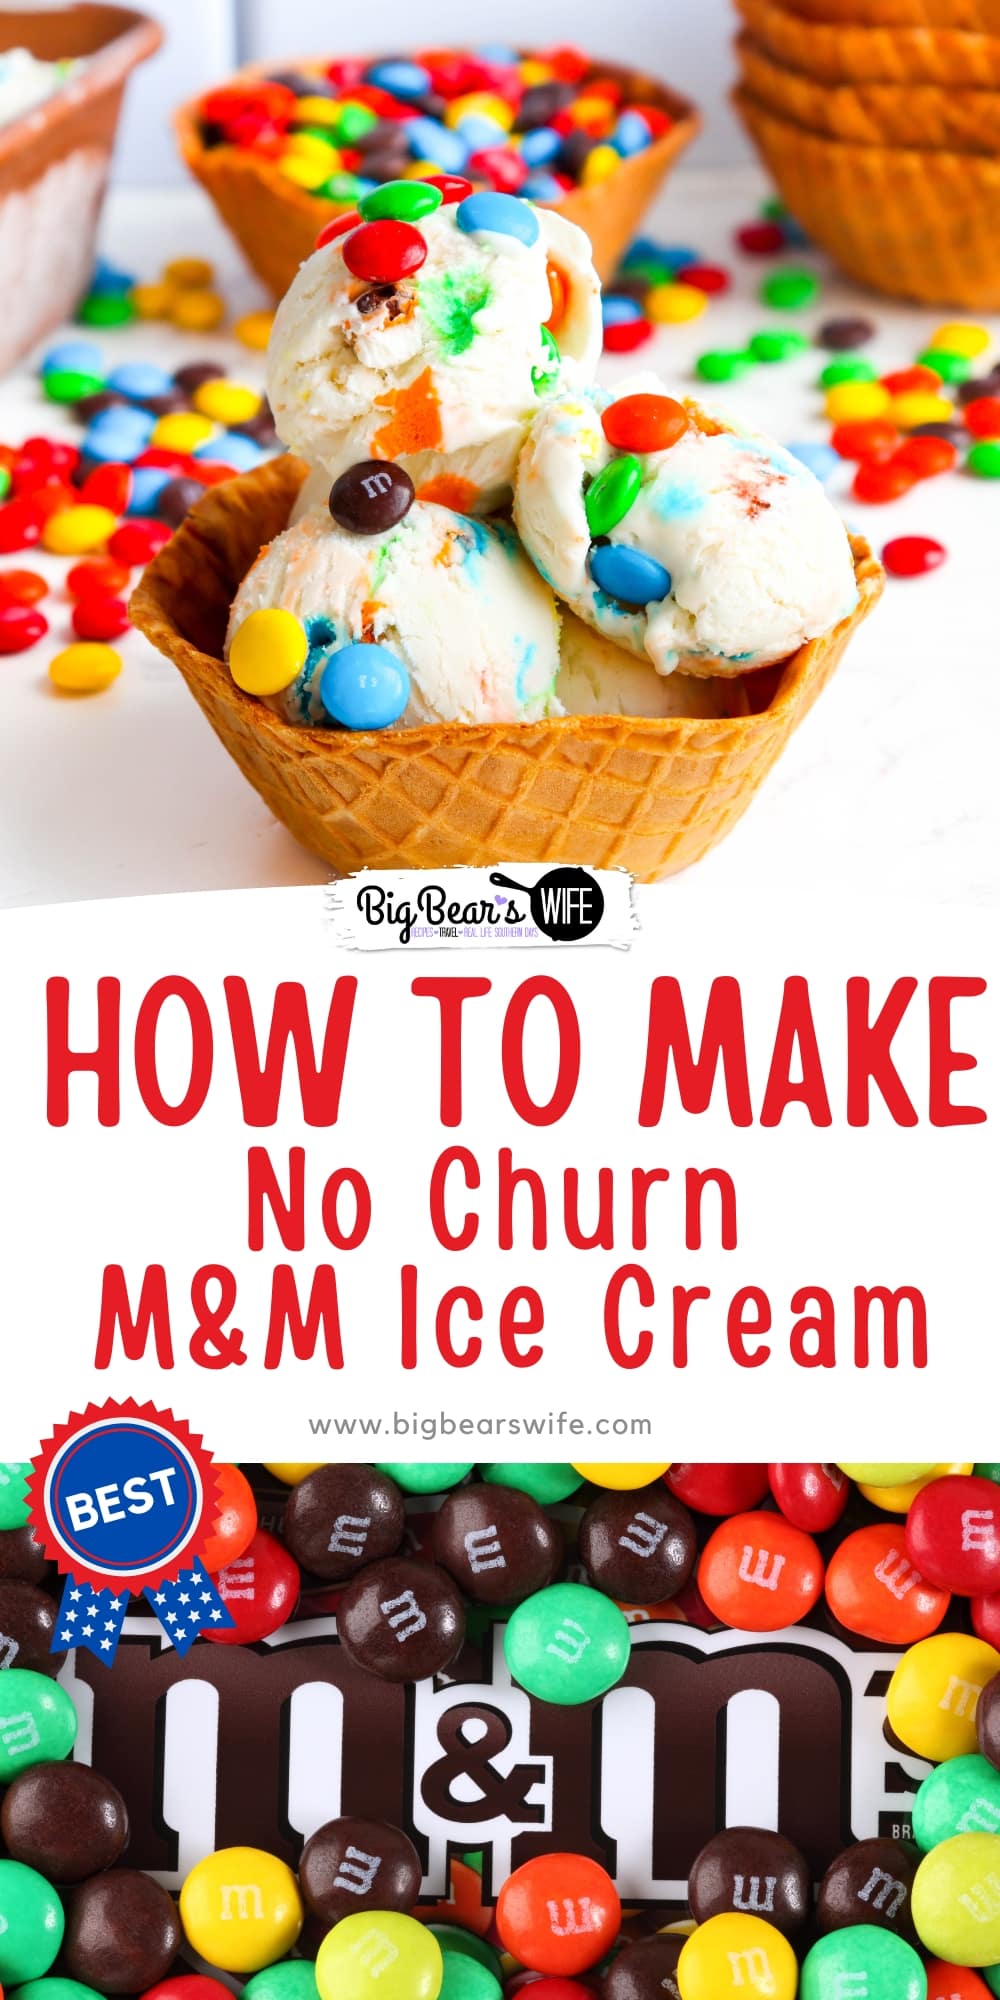 With hot summer months right around the corner, it's time to start thinking about refreshing and indulgent desserts. Enter no churn M&M ice cream - the perfect way to cool off and satisfy your sweet tooth. via @bigbearswife